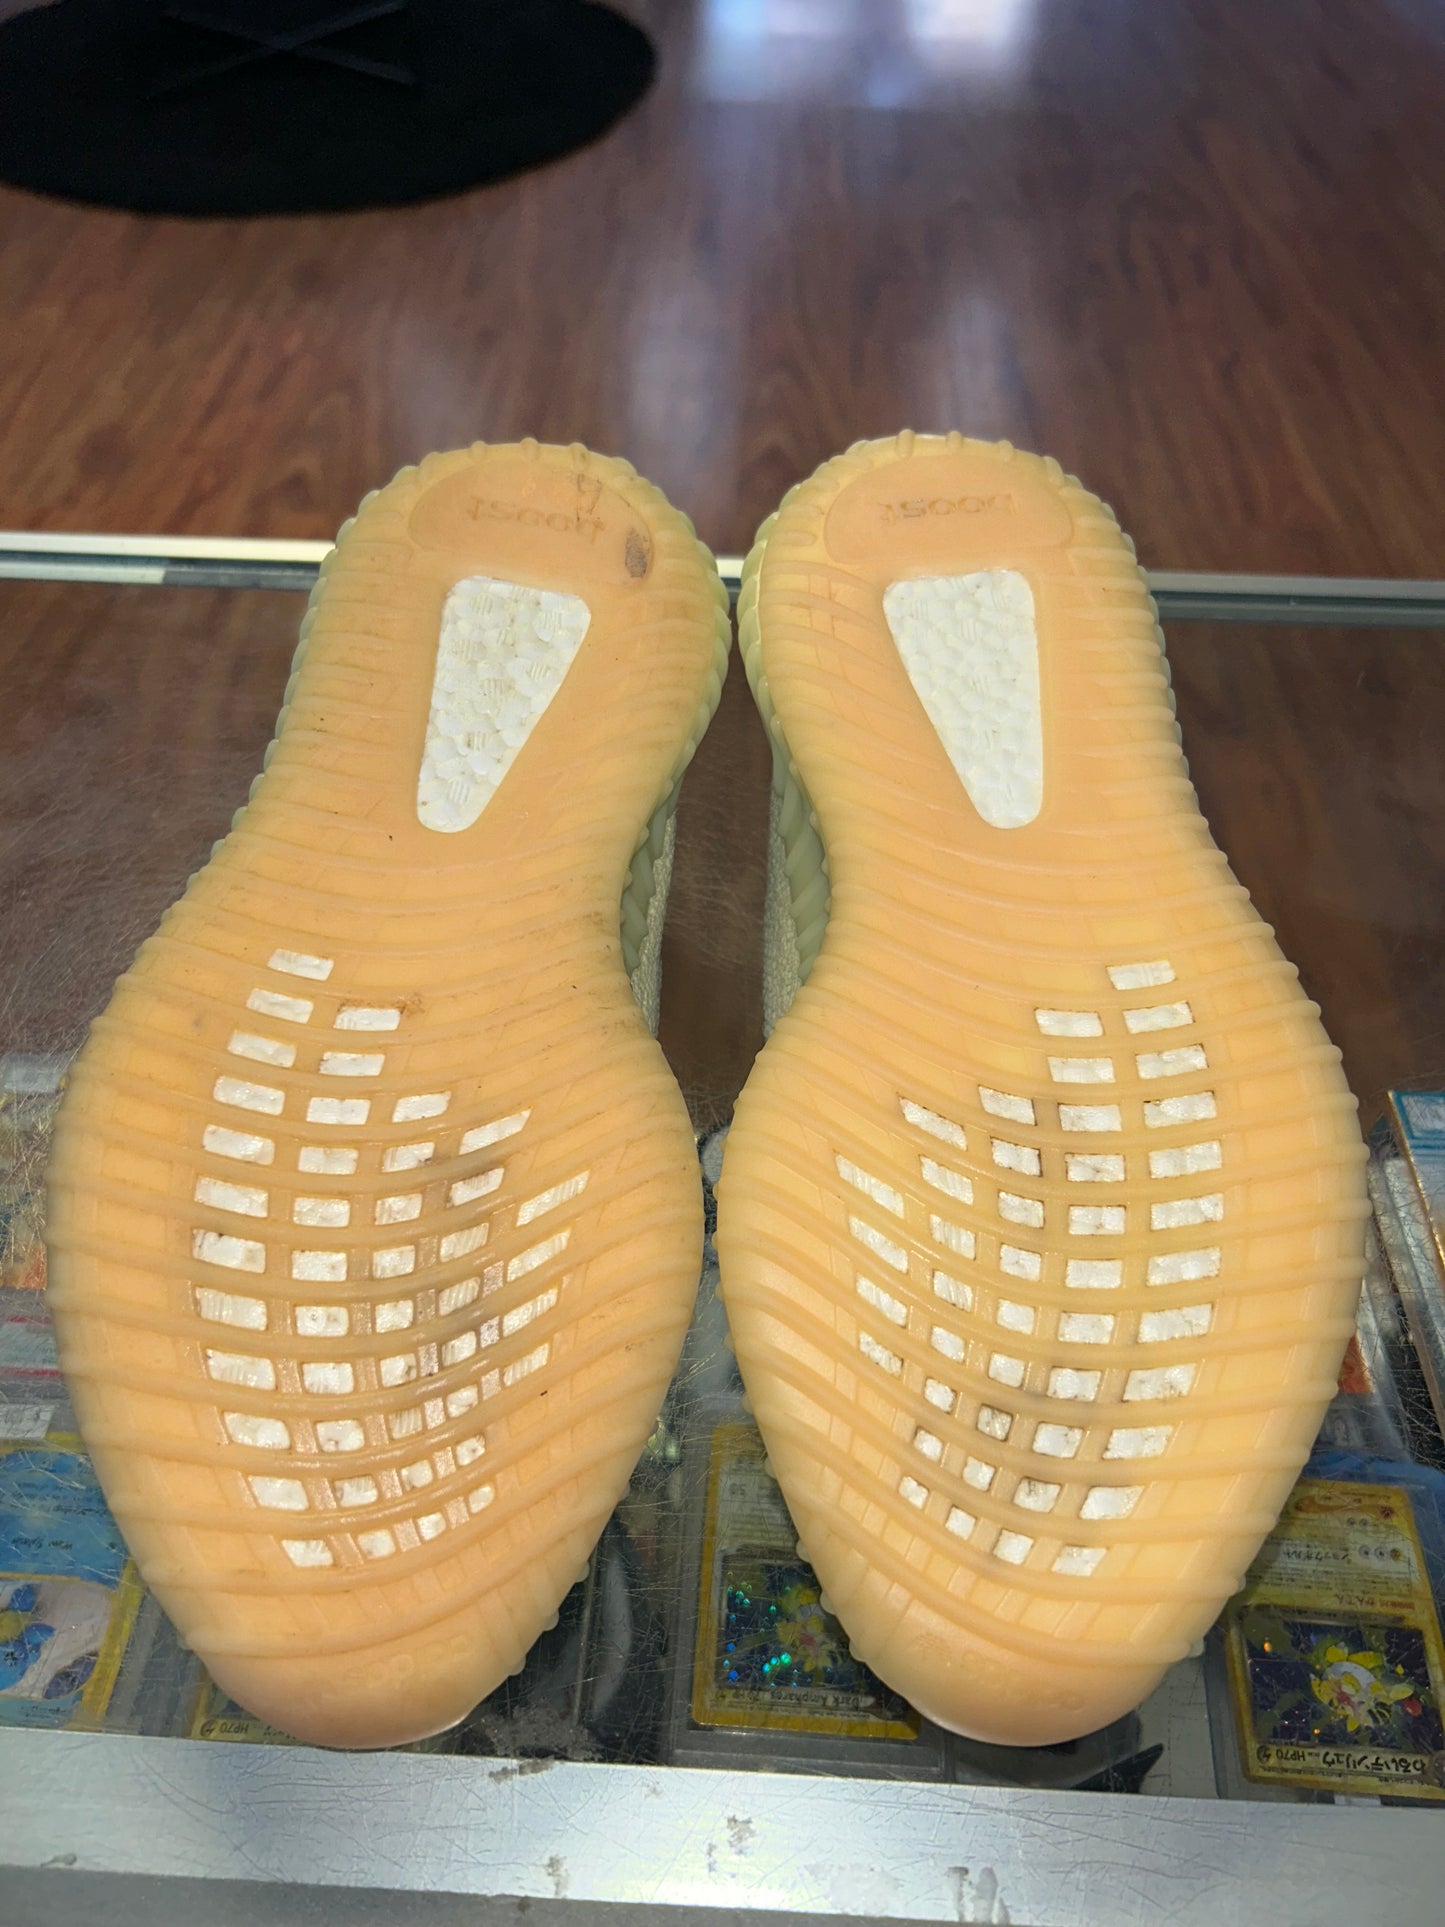 Size 8.5 Adidas Yeezy Boost 350 “Butter” (MAMO)